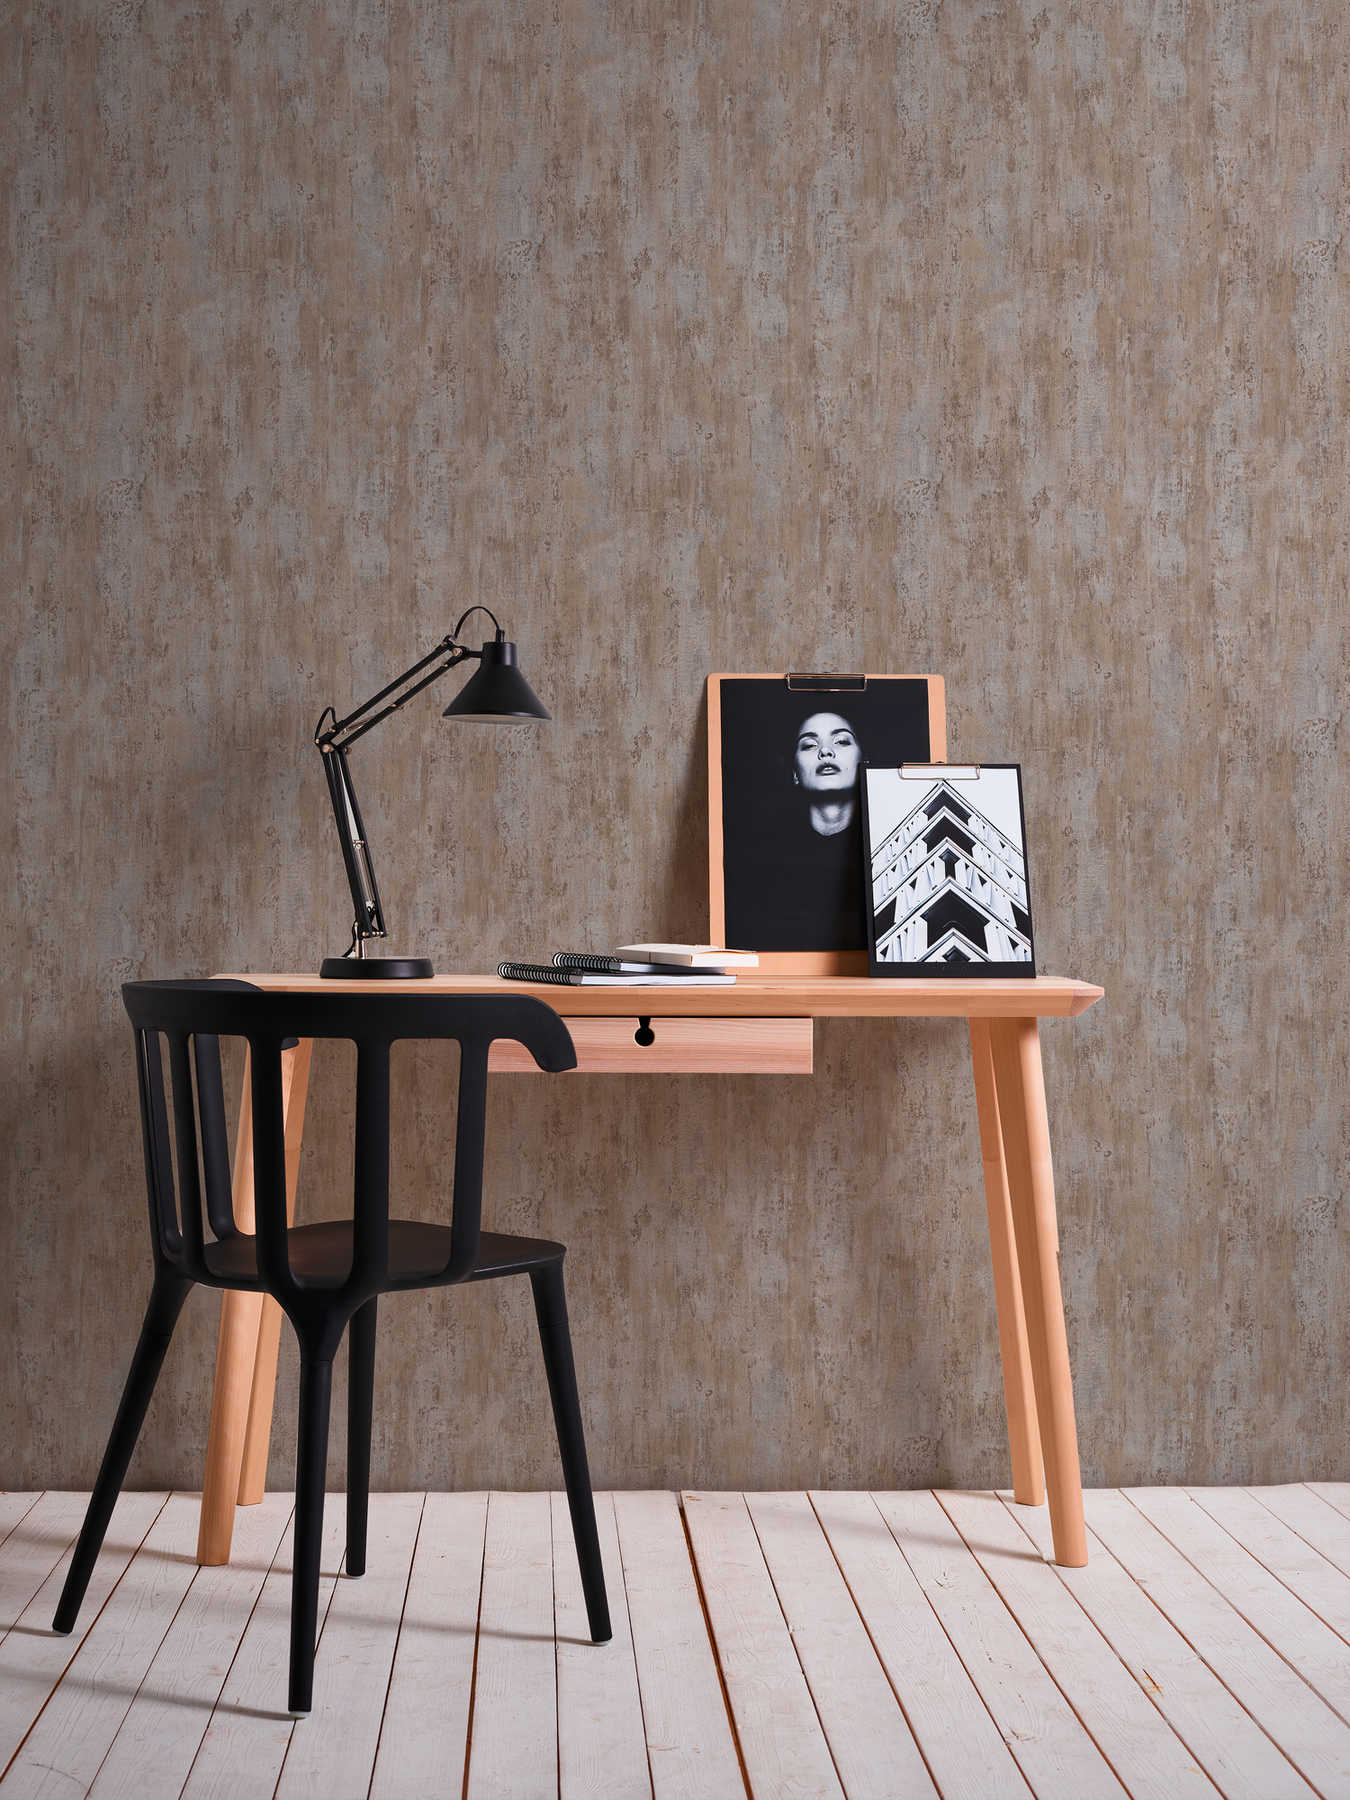             Non-woven wallpaper colour pattern, used look for industrial design - grey, brown
        